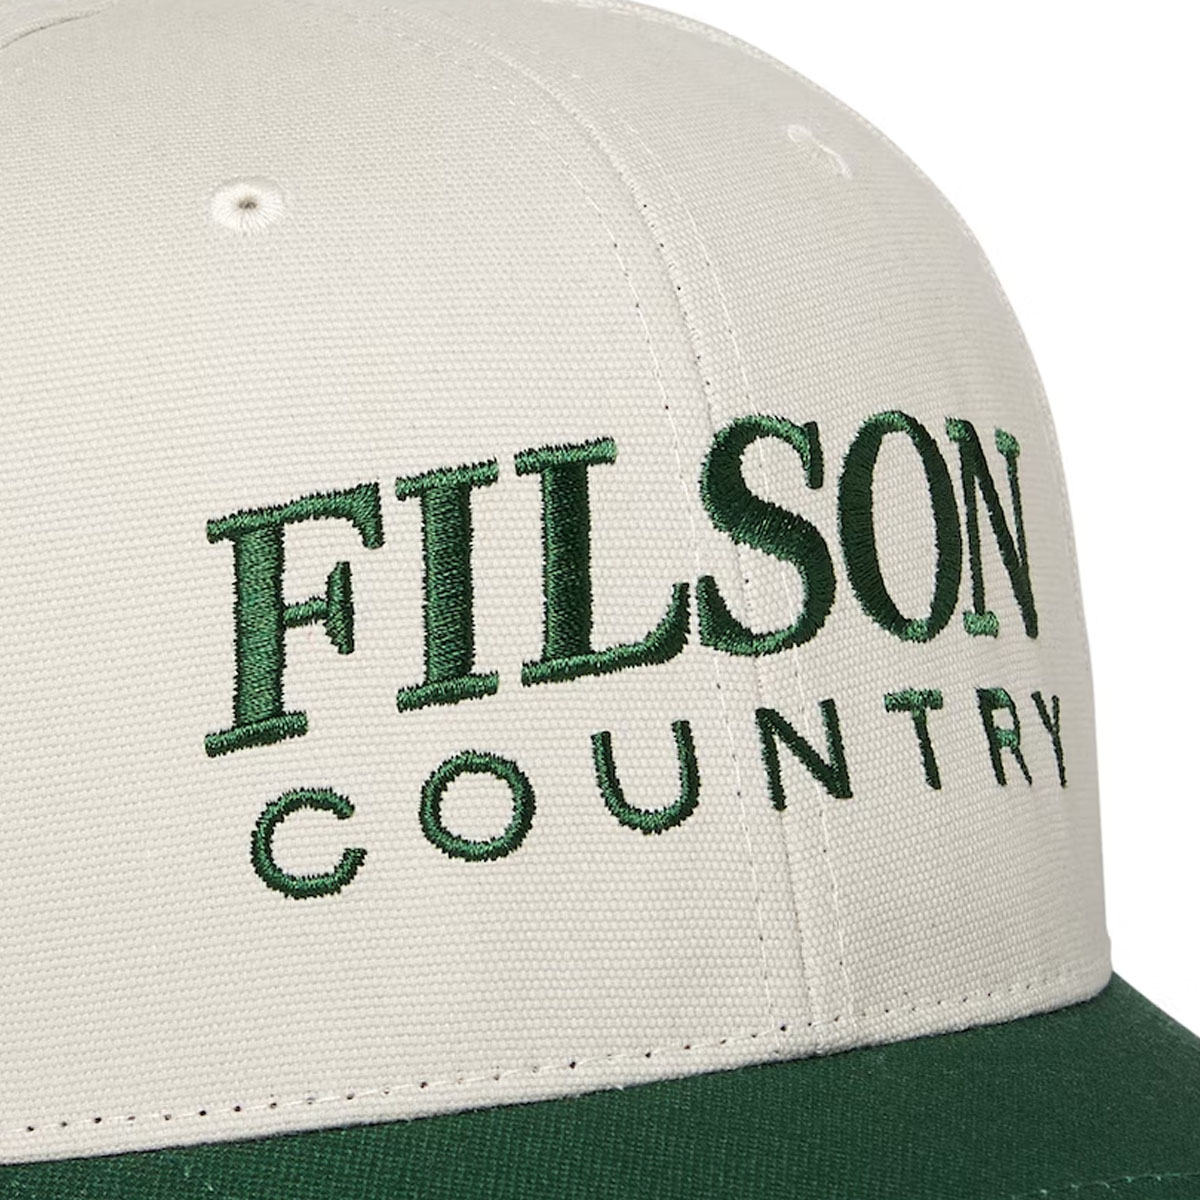 Filson Logger Cap Tan/Country, cap that protects your head from the elements